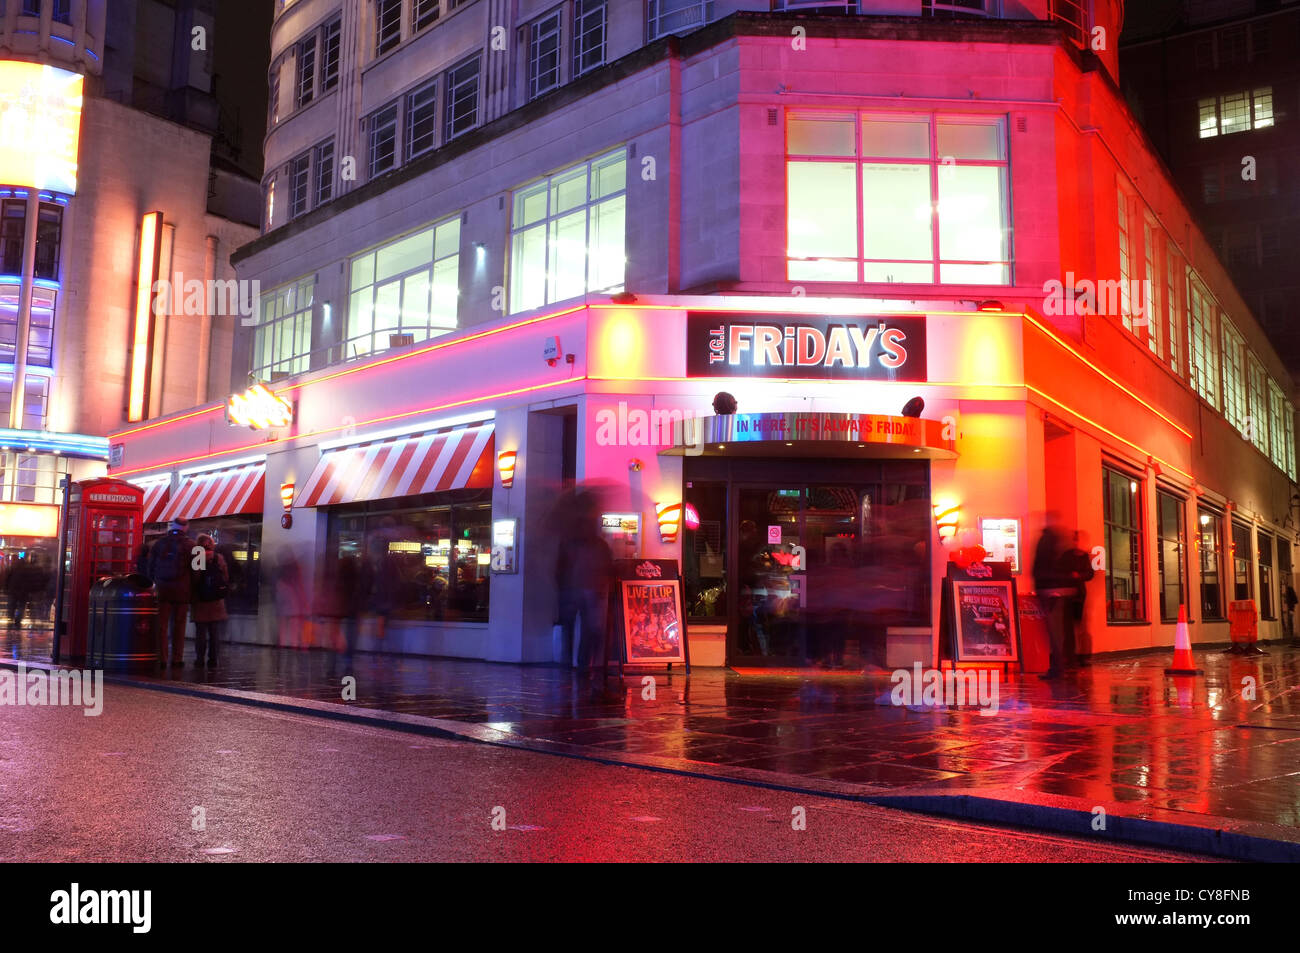 T&J Fridays Restaurant in Piccadilly, London Stock Photo